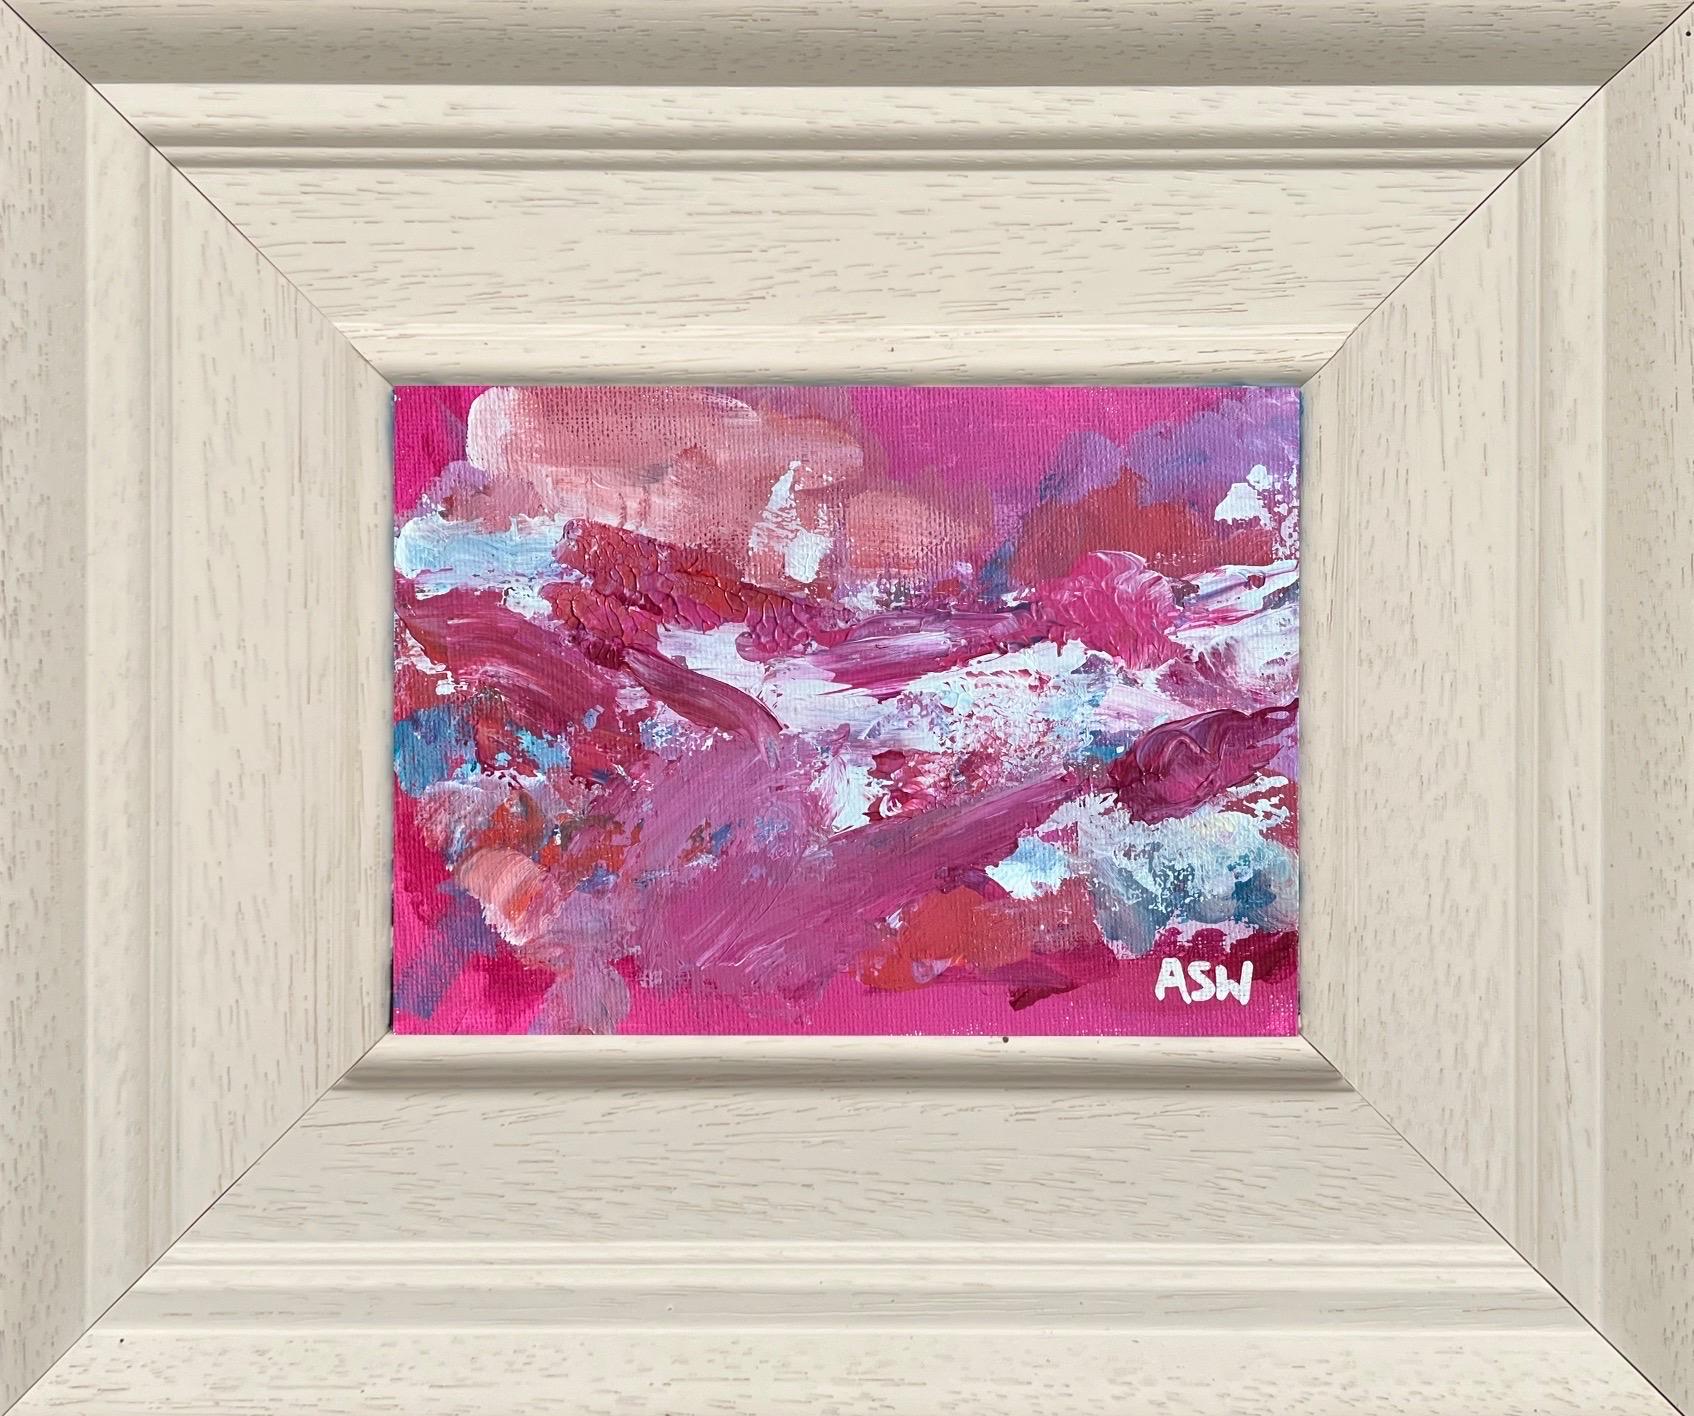 Miniature Abstract Painting on Pink Background by Contemporary British Artist, Angela Wakefield

Art measures 7 x 5 inches
Frame measures 12 x 10 inches 

Angela Wakefield has twice been on the front cover of ‘Art of England’ and featured in